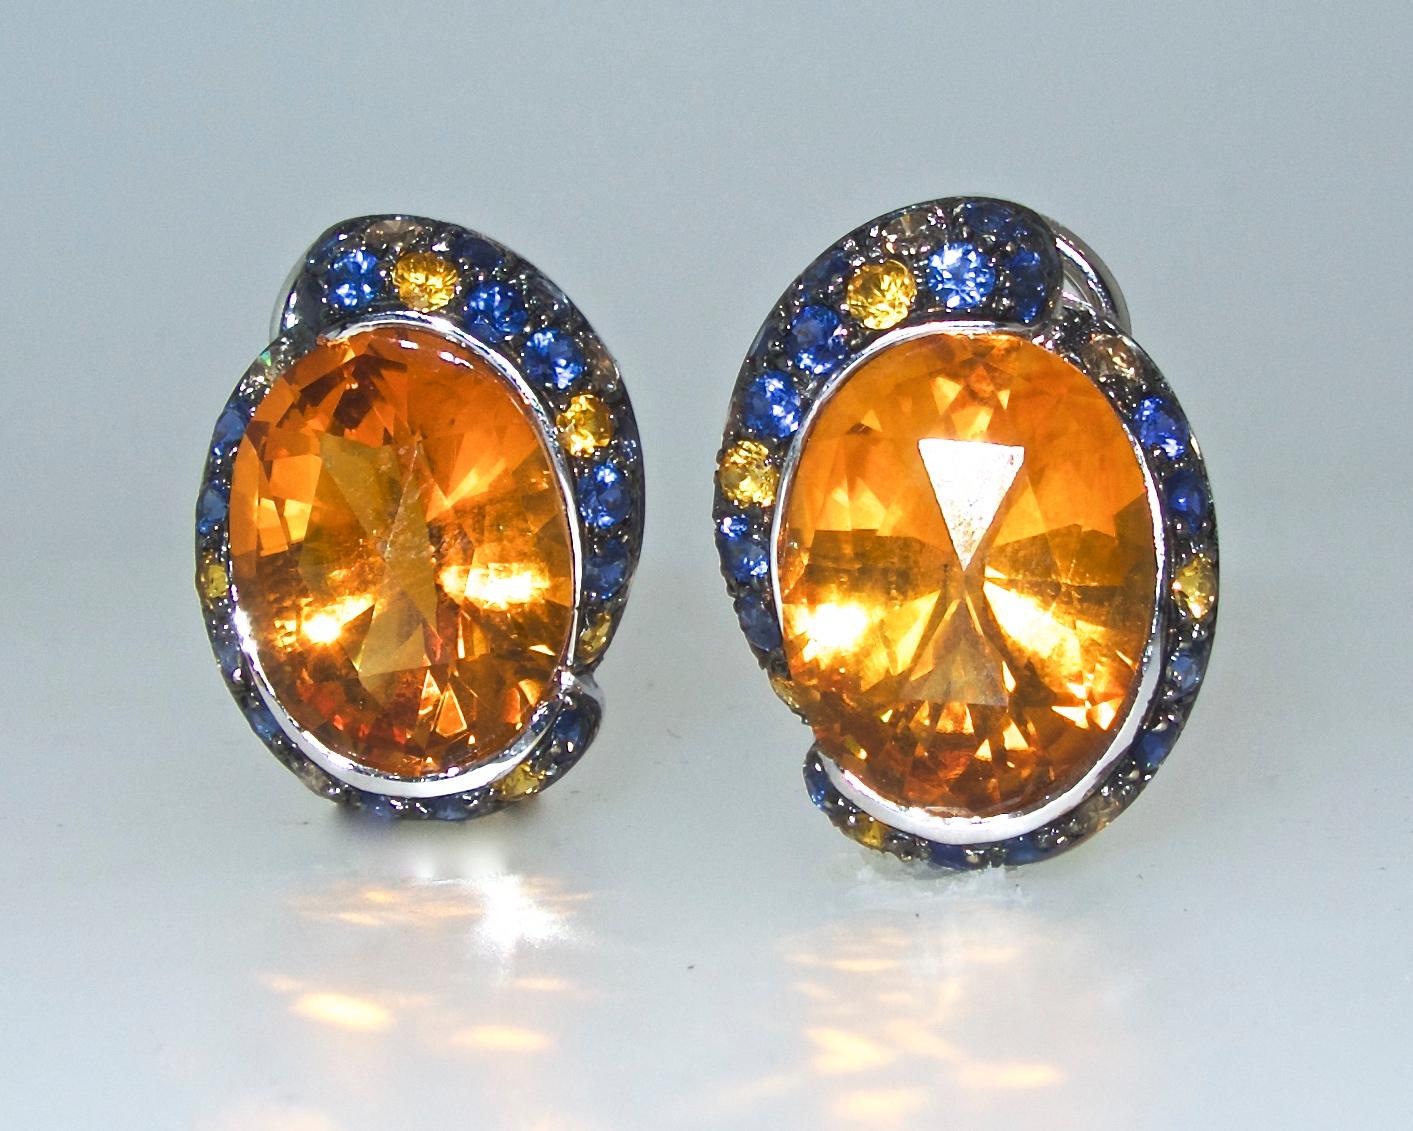 These oval natural Citrines, weighing totally approximately 20 cts.,  are bezel set in 18K white gold, they have  a vibrant bright yellow-orange referred to as Madeira Citrine - the most valuable color of Citrines.  It is important to look for this